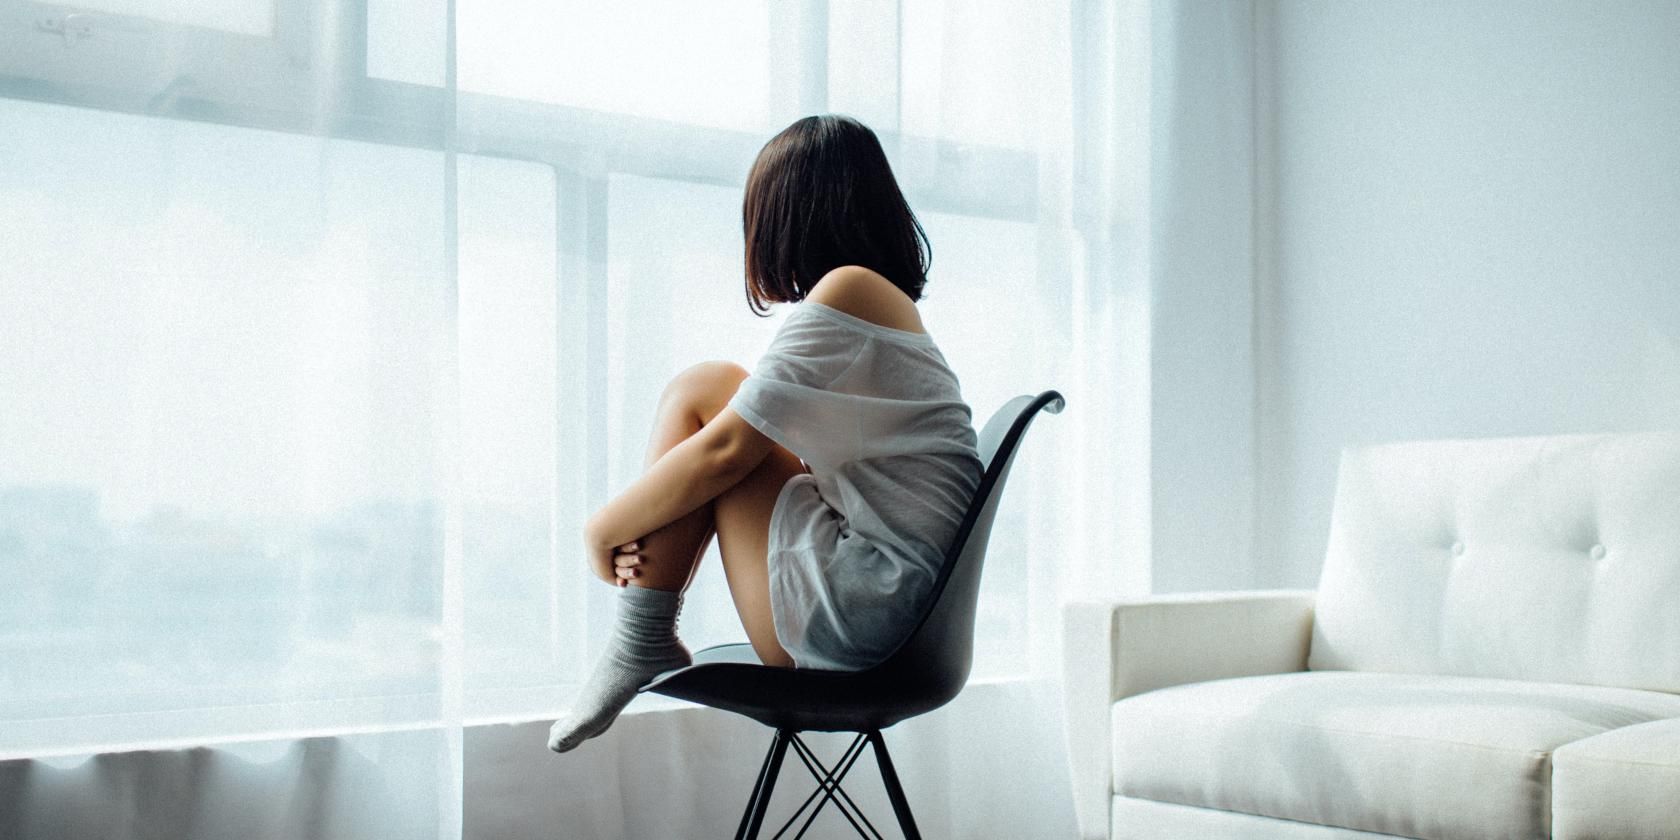 Lonely girl sitting on a chair by herself in a white room depicting depression